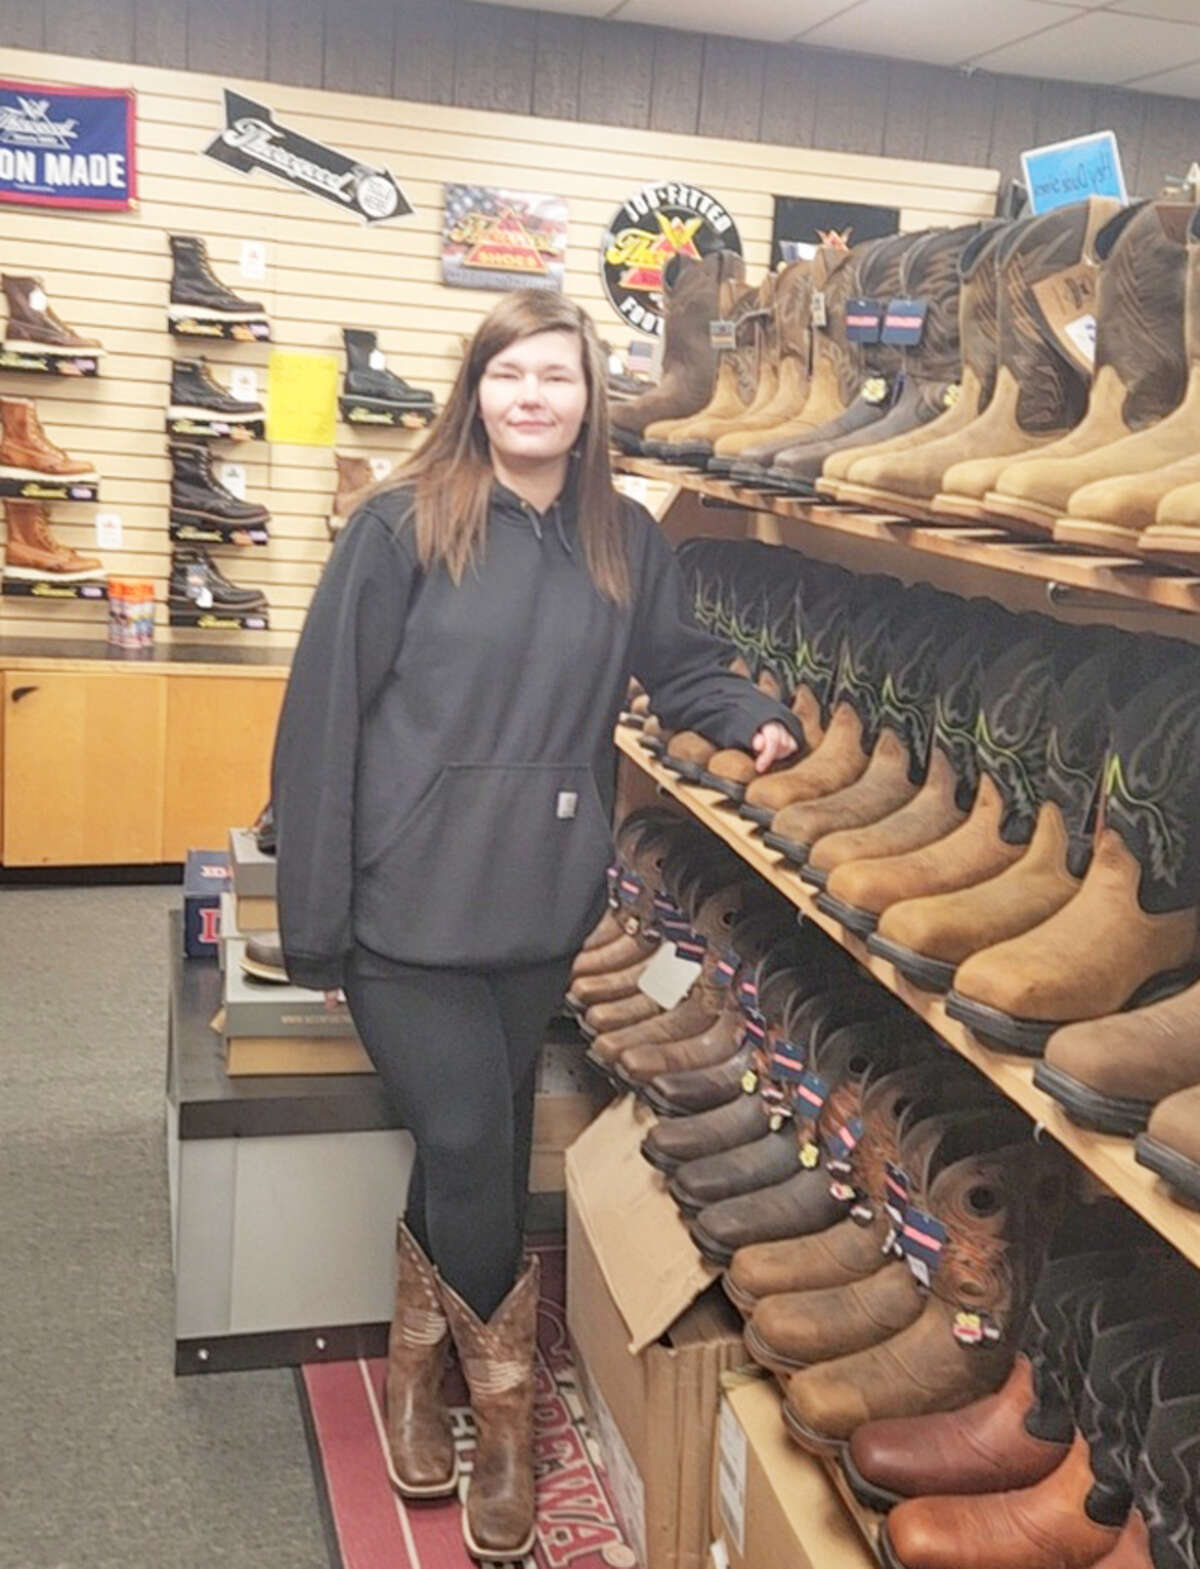 Whether at her job or at home in Troy with her 7-year-old son, Nicole Lanahan is a believer in community service. She works for London Shoe Shop in Collinsville.